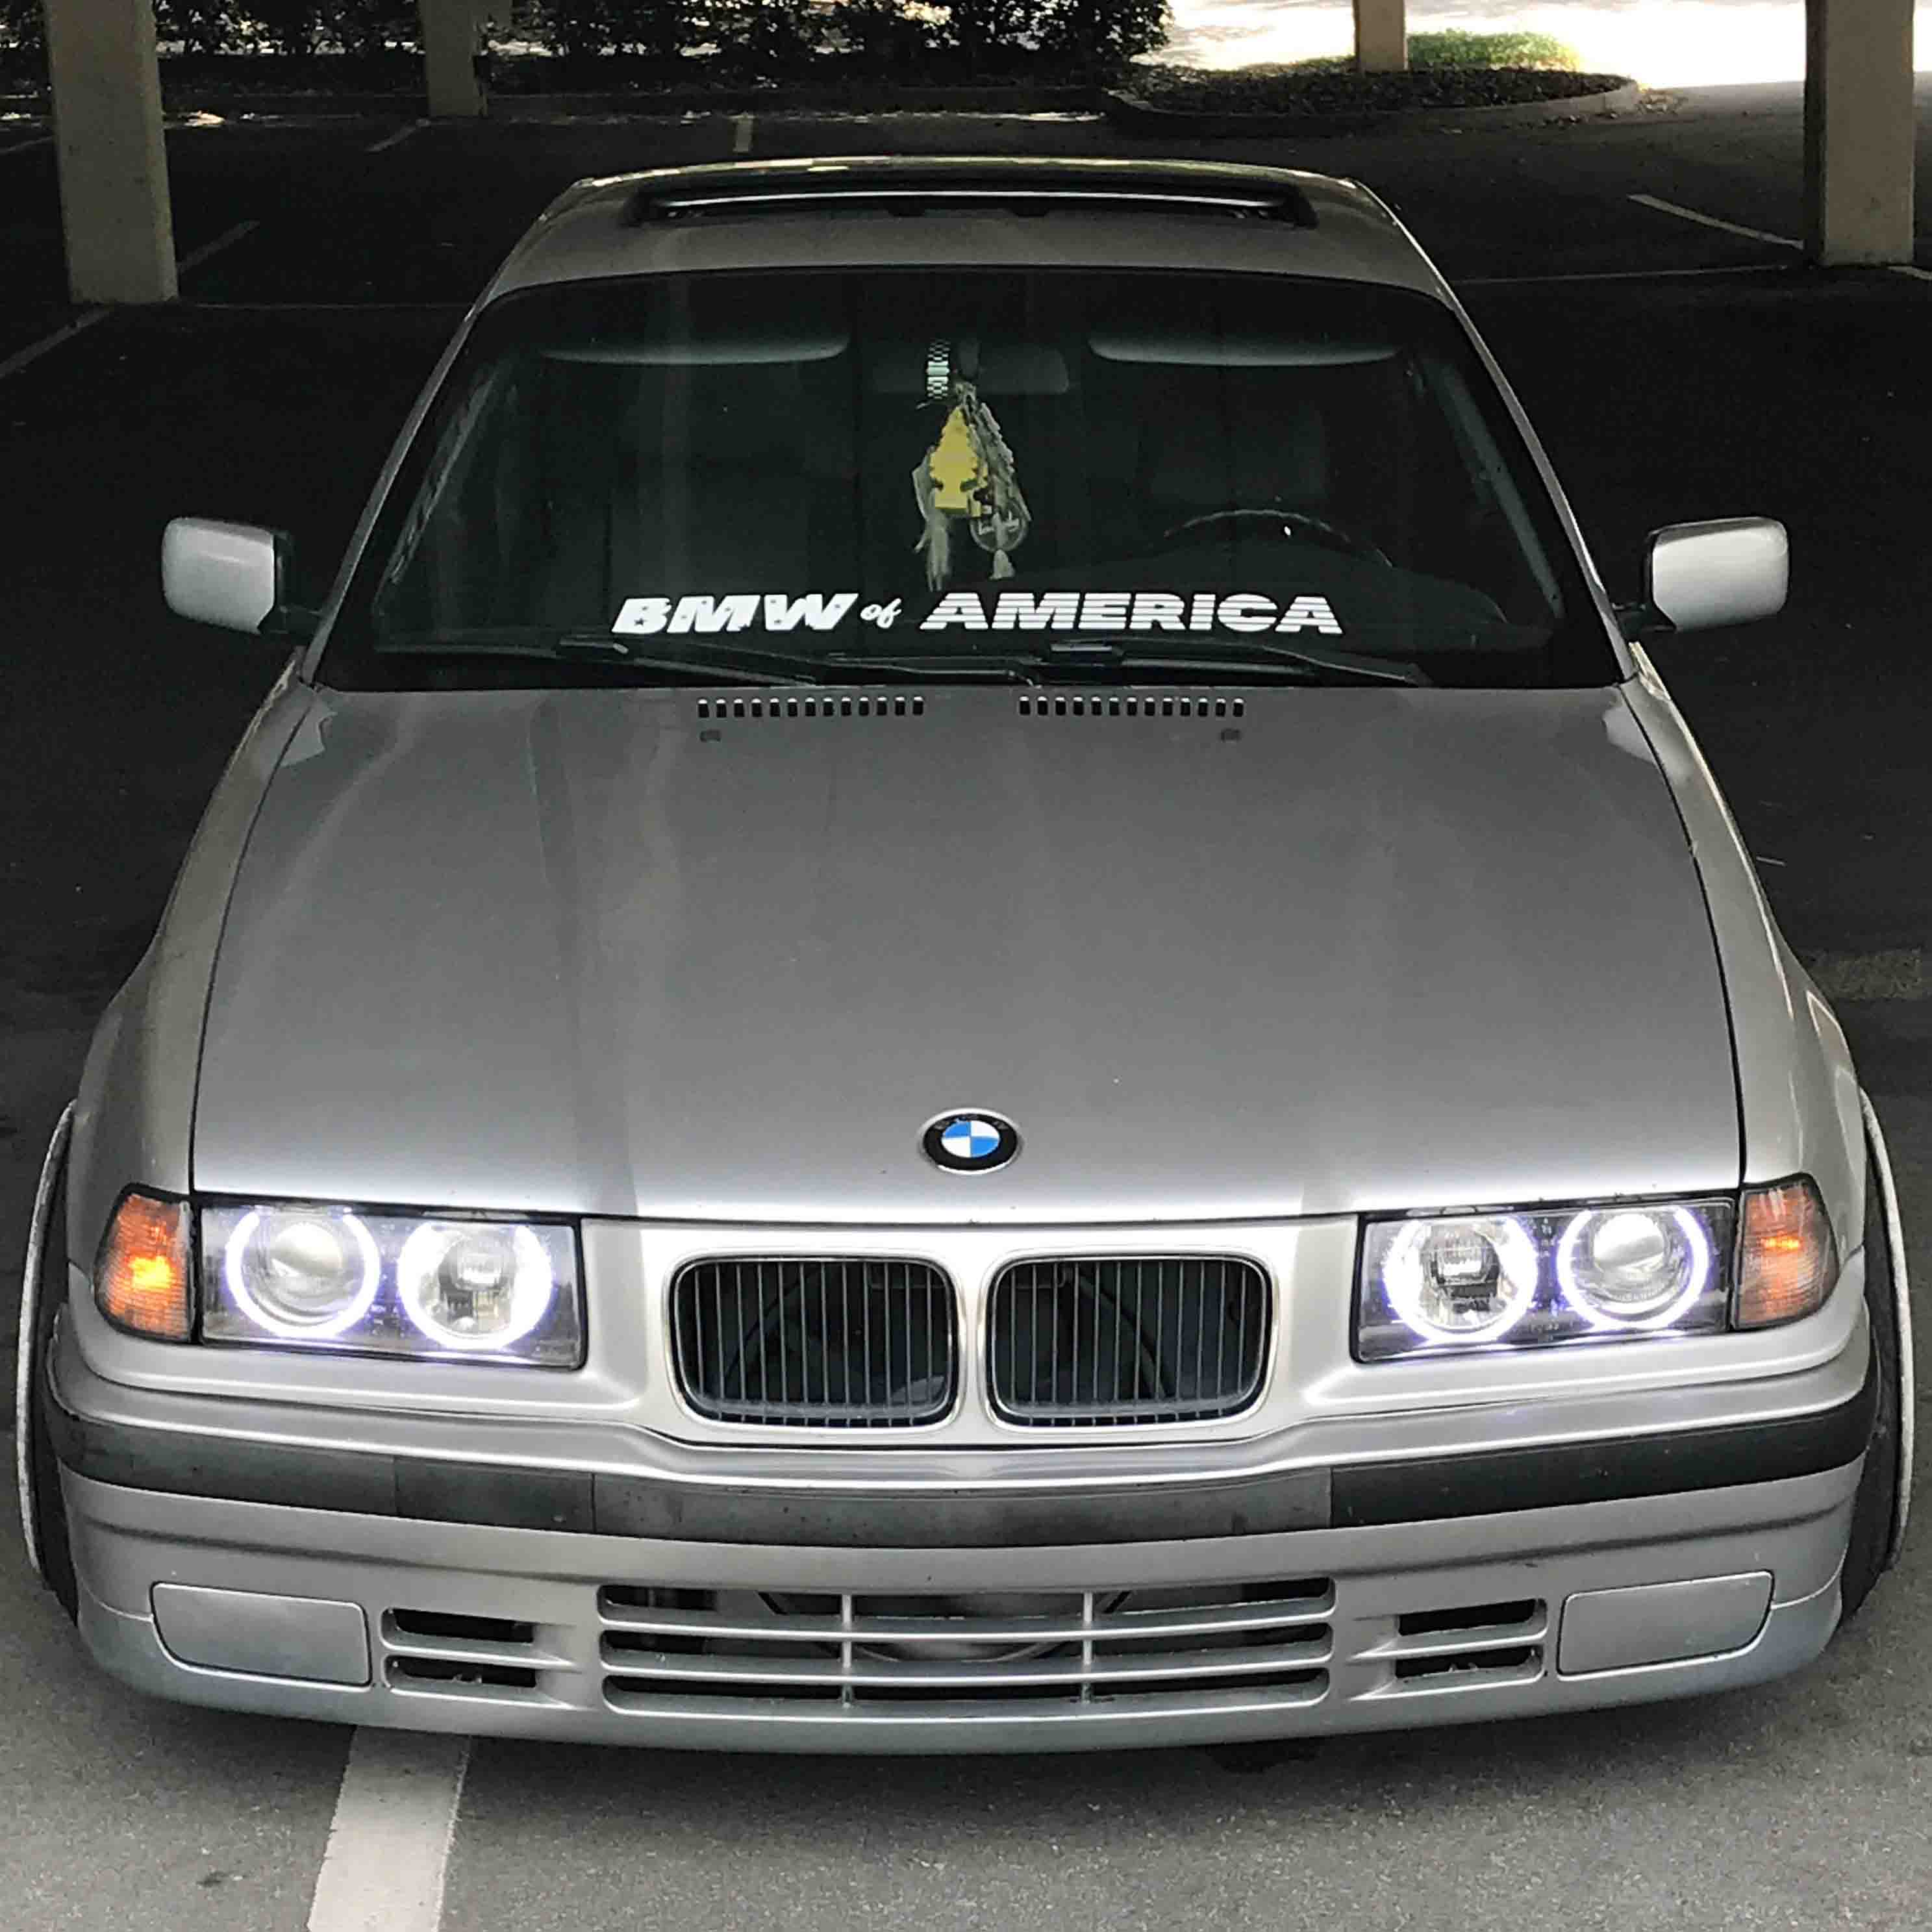 BMW of America windshield banner on our e36 project car